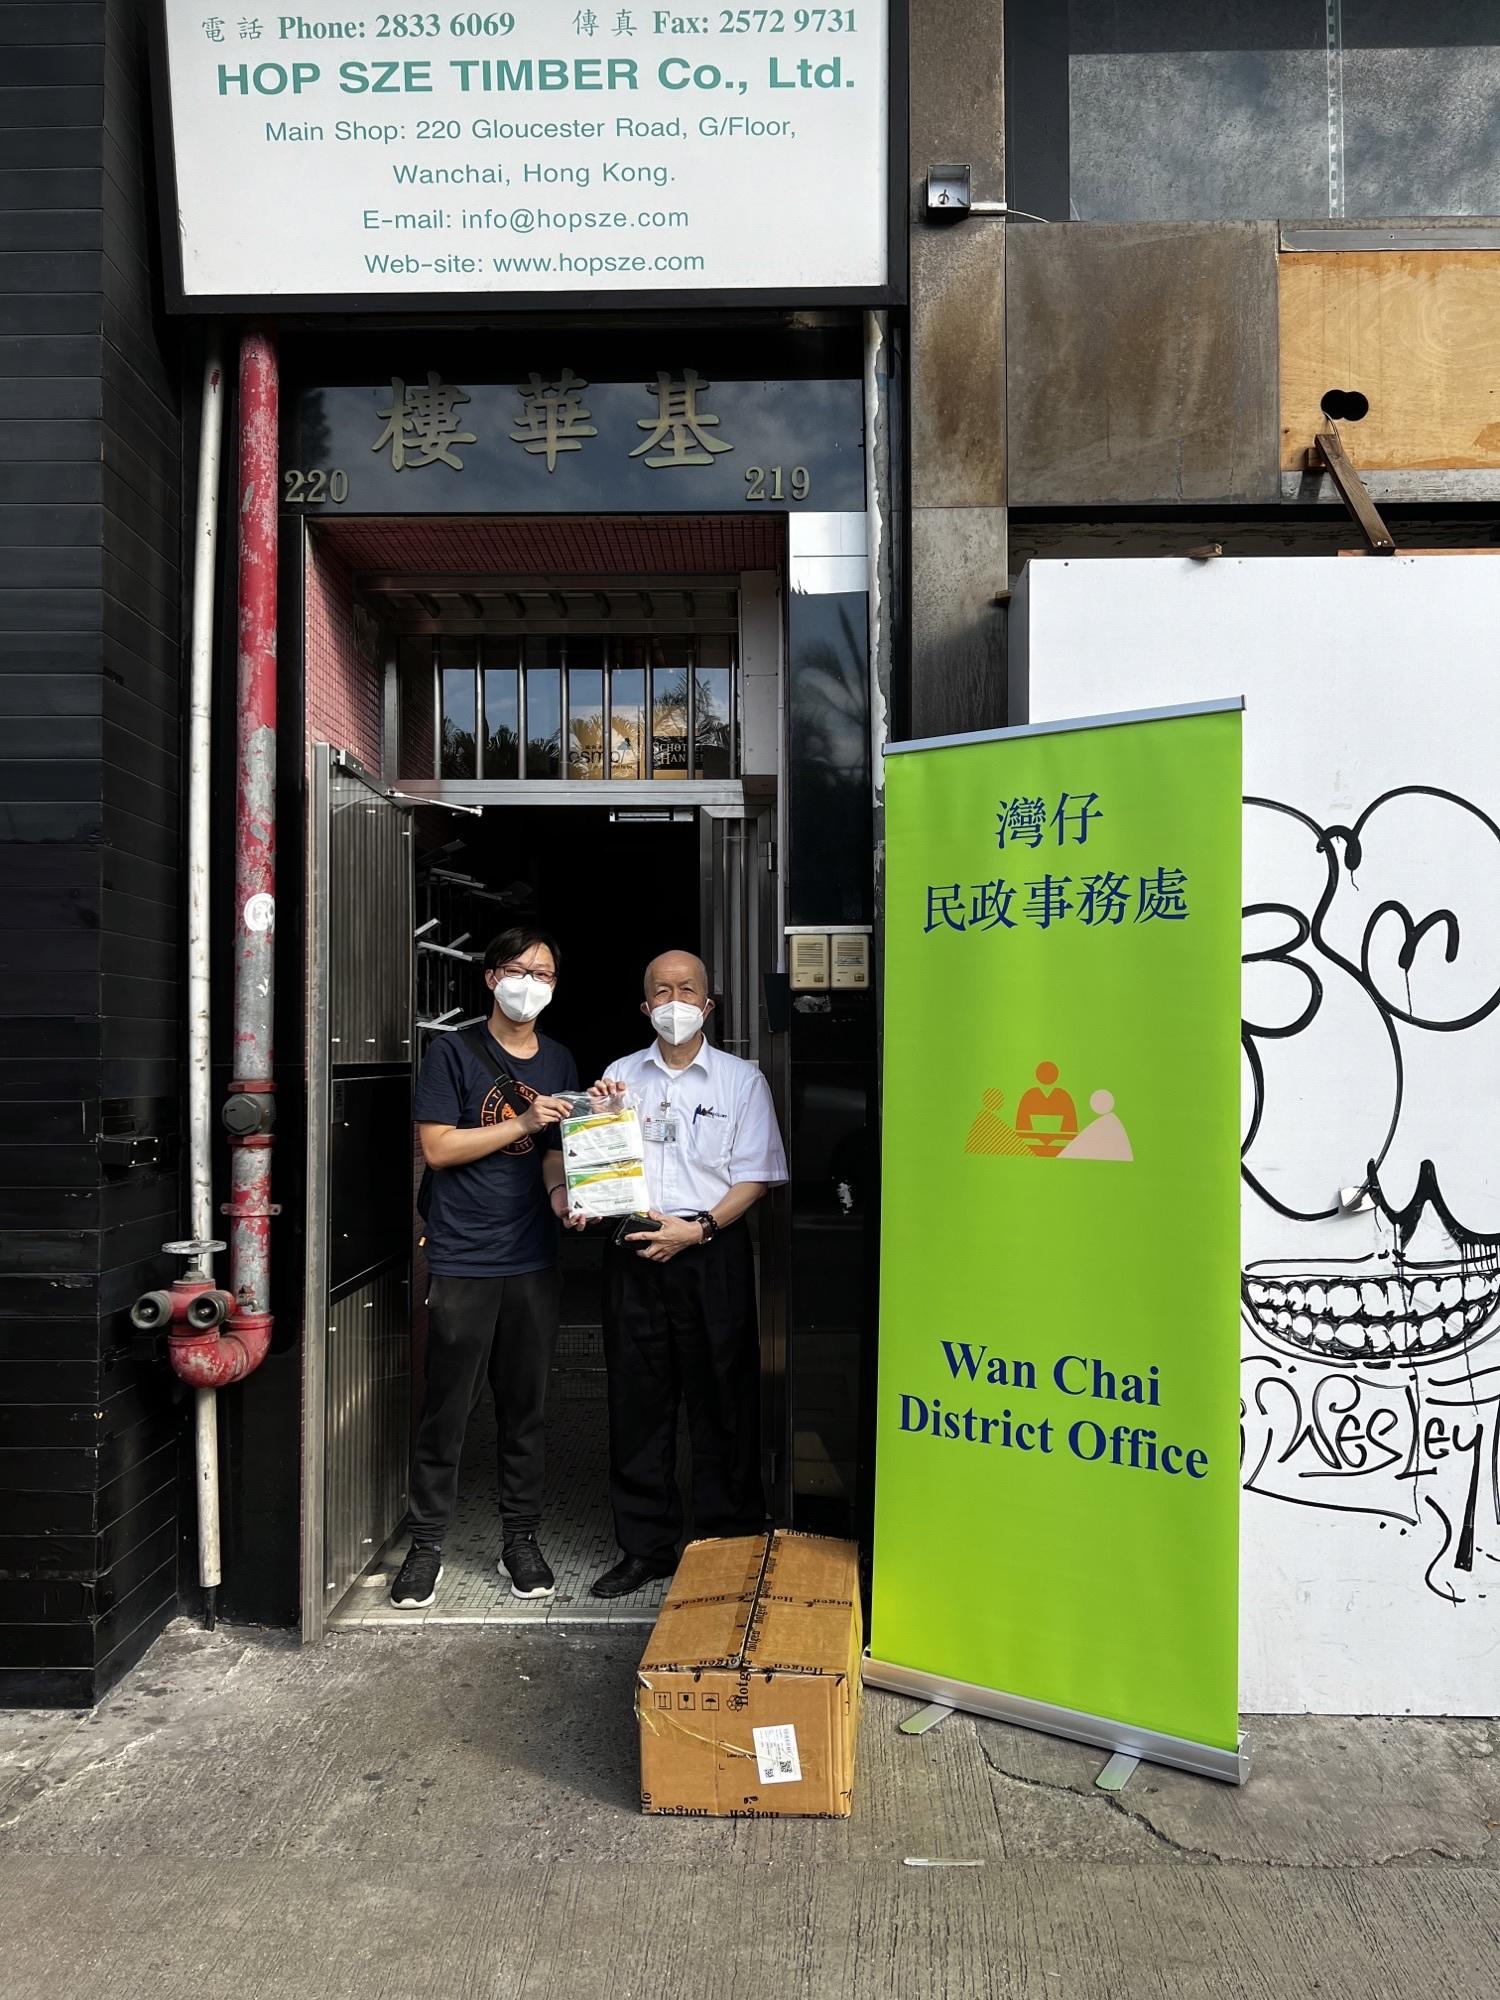 The Wan Chai District Office today (May 19) distributed COVID-19 rapid test kits to households, cleansing workers and property management staff living and working in Kei Wa Building for voluntary testing through the property management company.